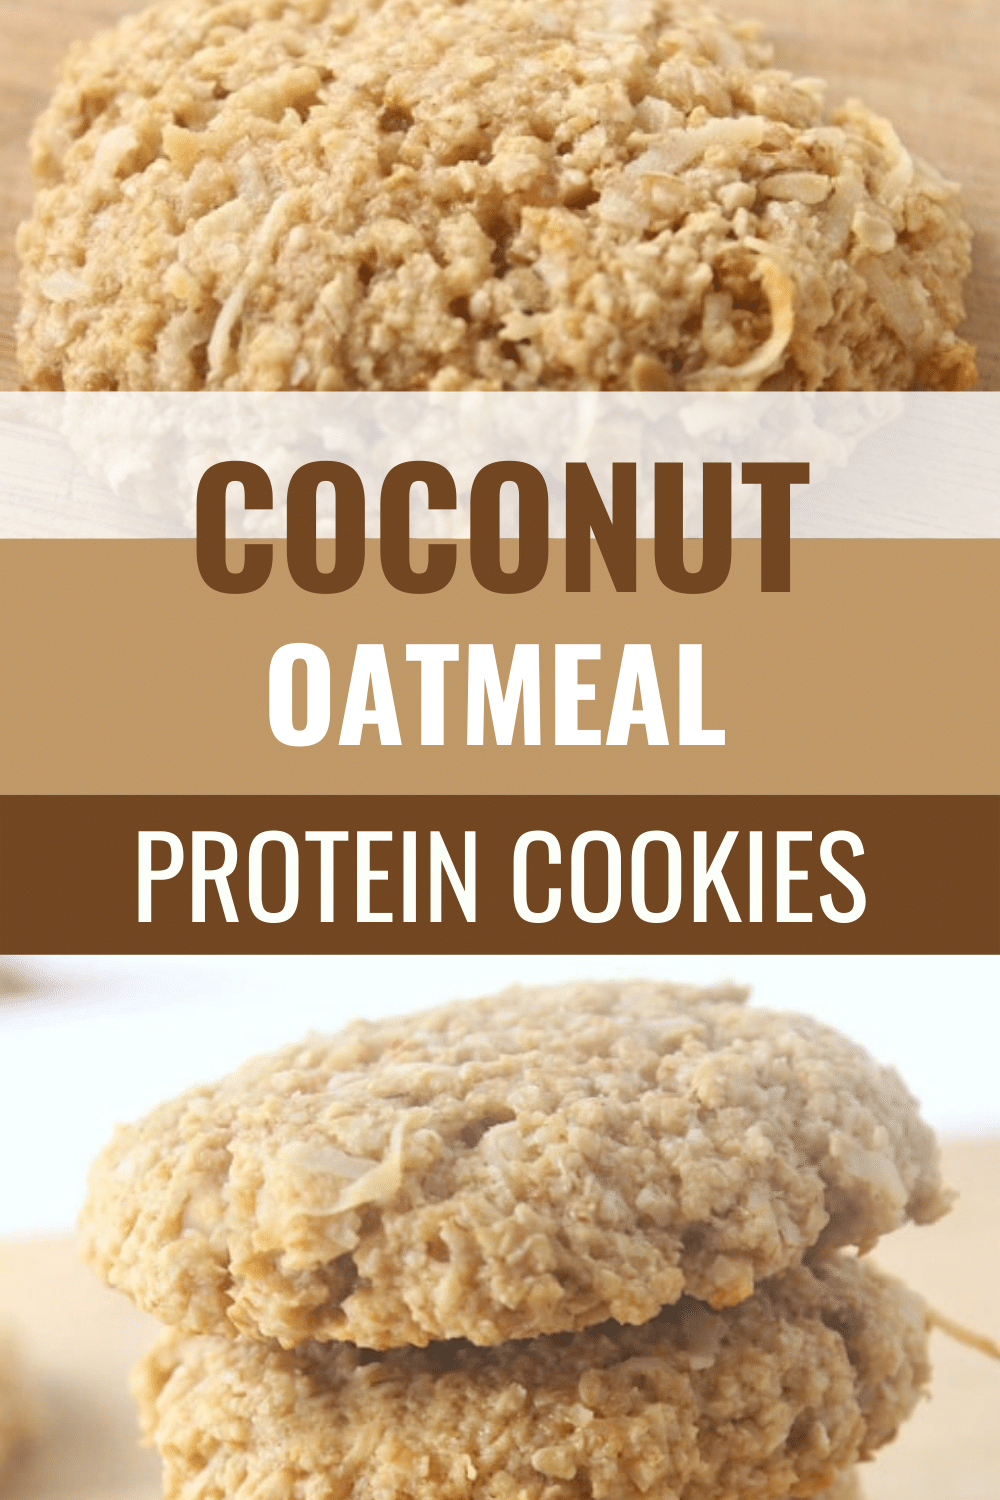 These coconut oatmeal protein cookies are full of wholesome ingredients, providing plenty of protein and fiber for long-lasting energy in this tasty treat. #cookies #protein #oatmealcookies #coconut via @wondermomwannab